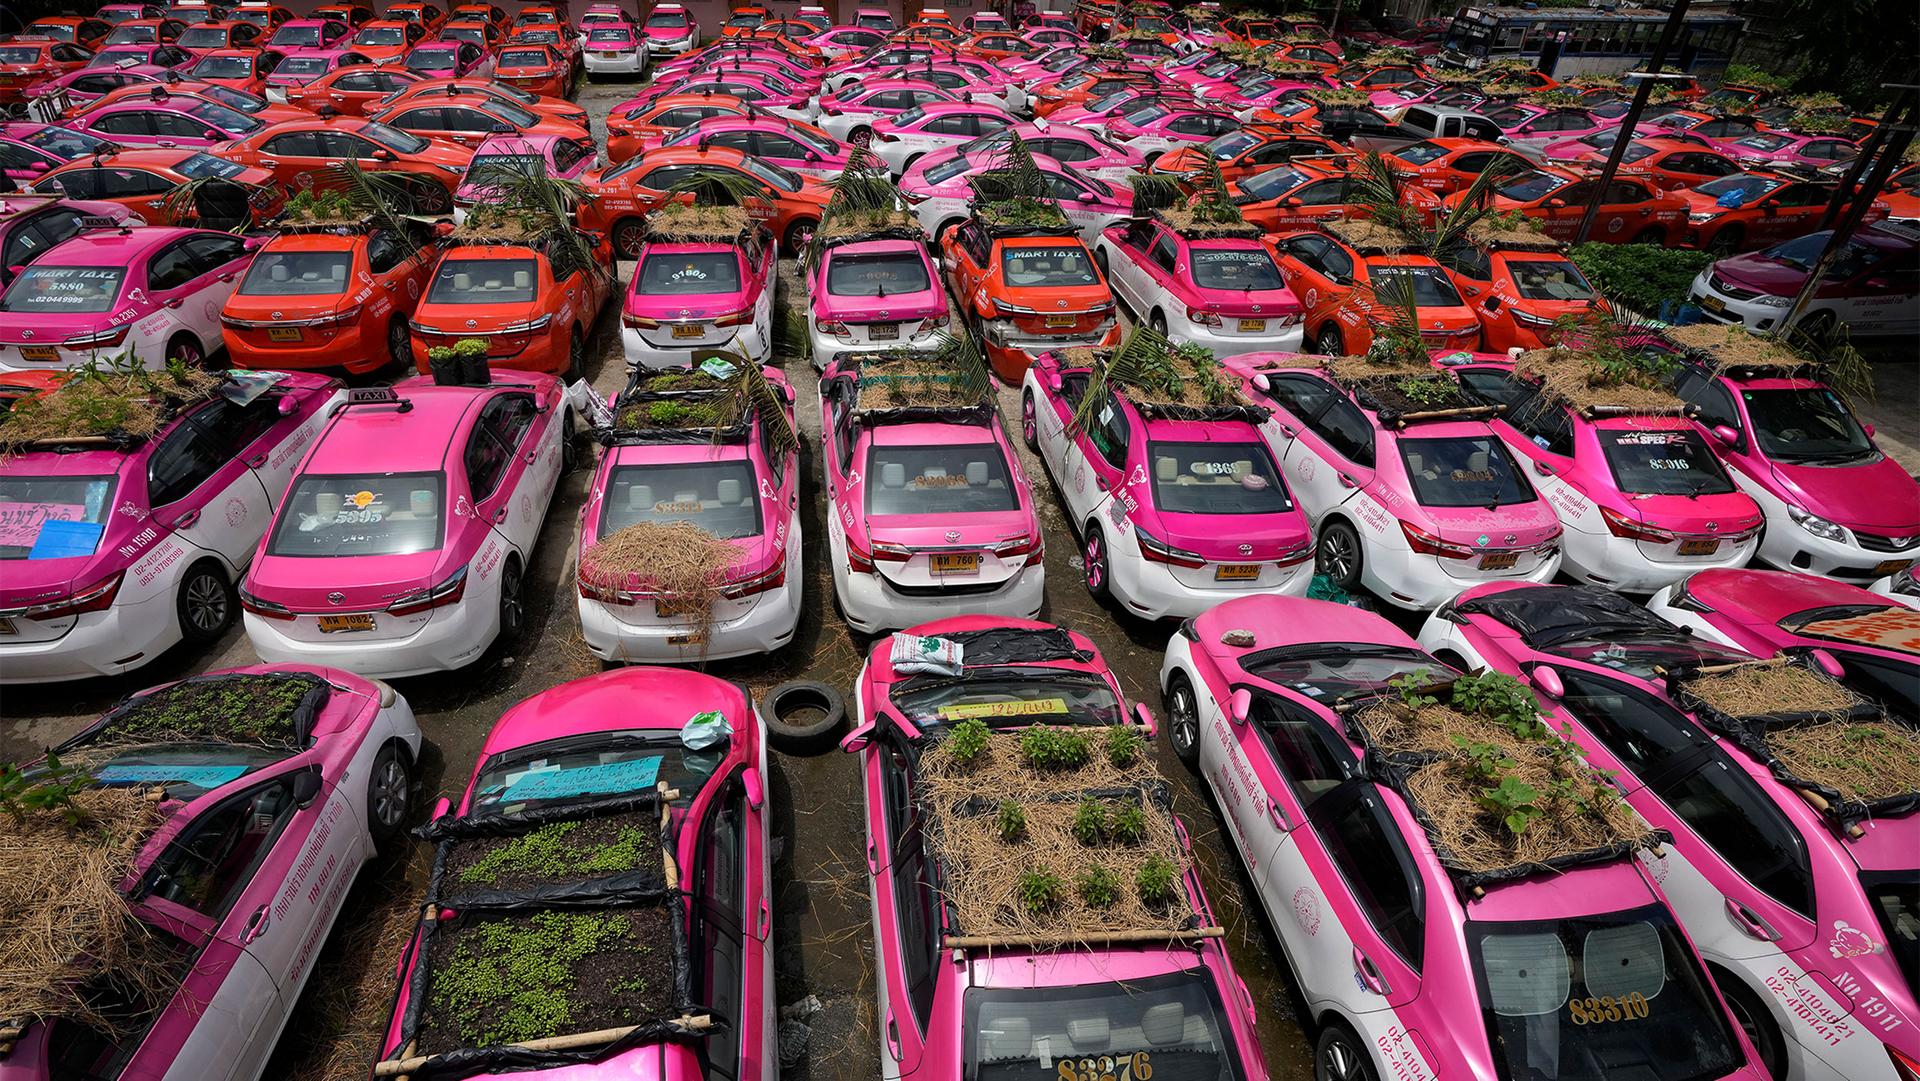 Miniature gardens are planted on the rooftops of unused taxis parked in Bangkok, Thailand